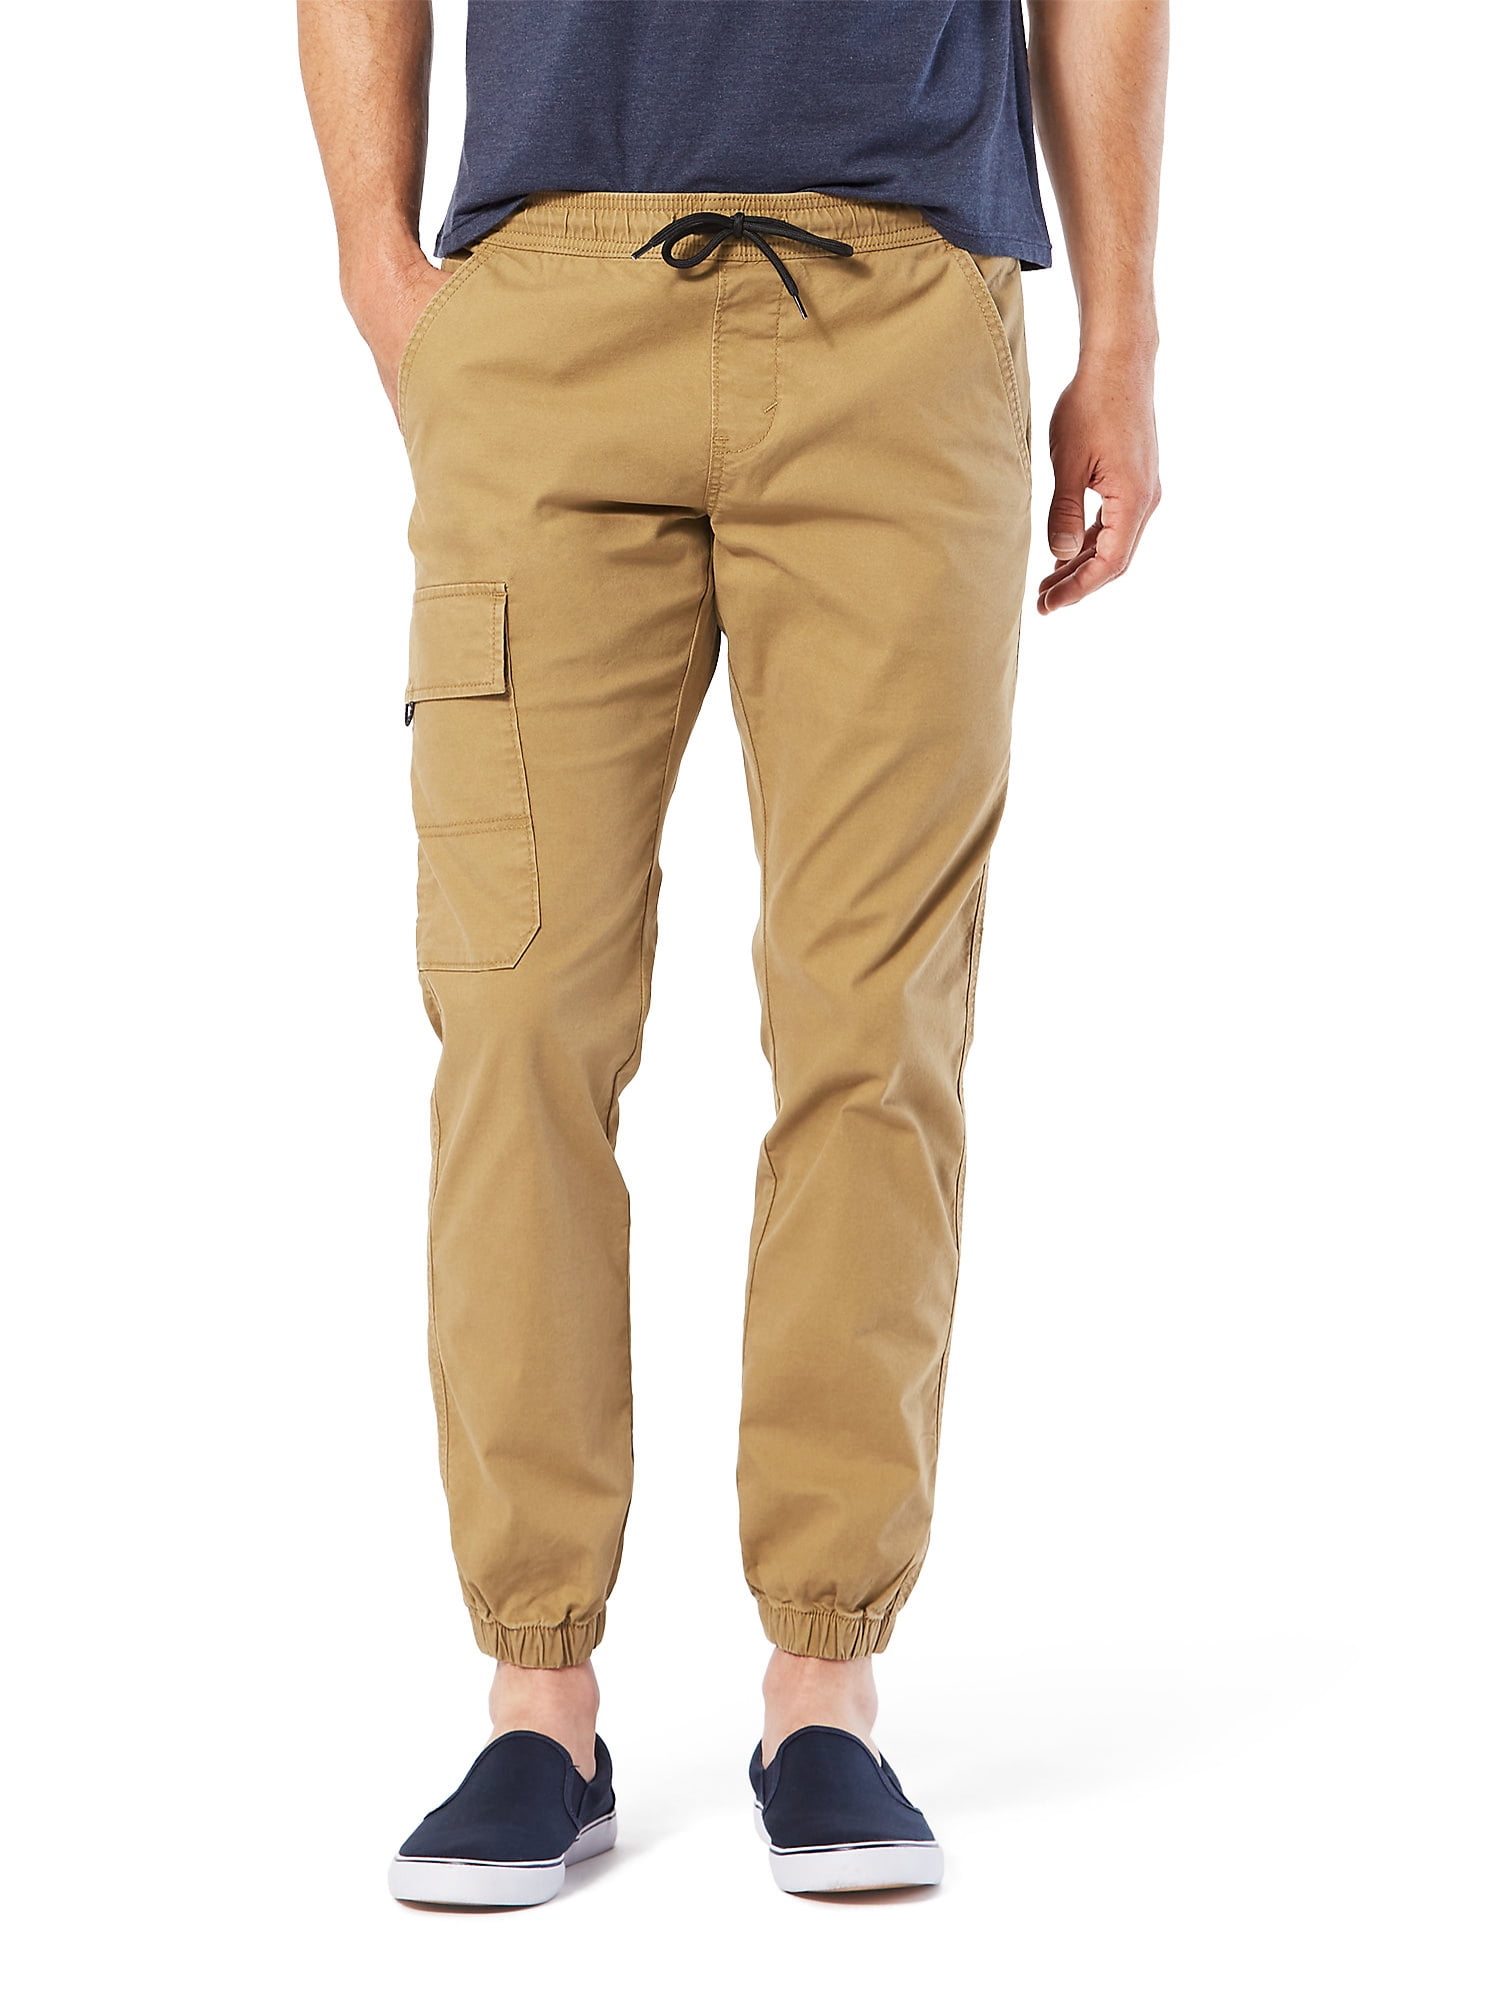 Signature by Levi Strauss & Co. Men's Utility Joggers 